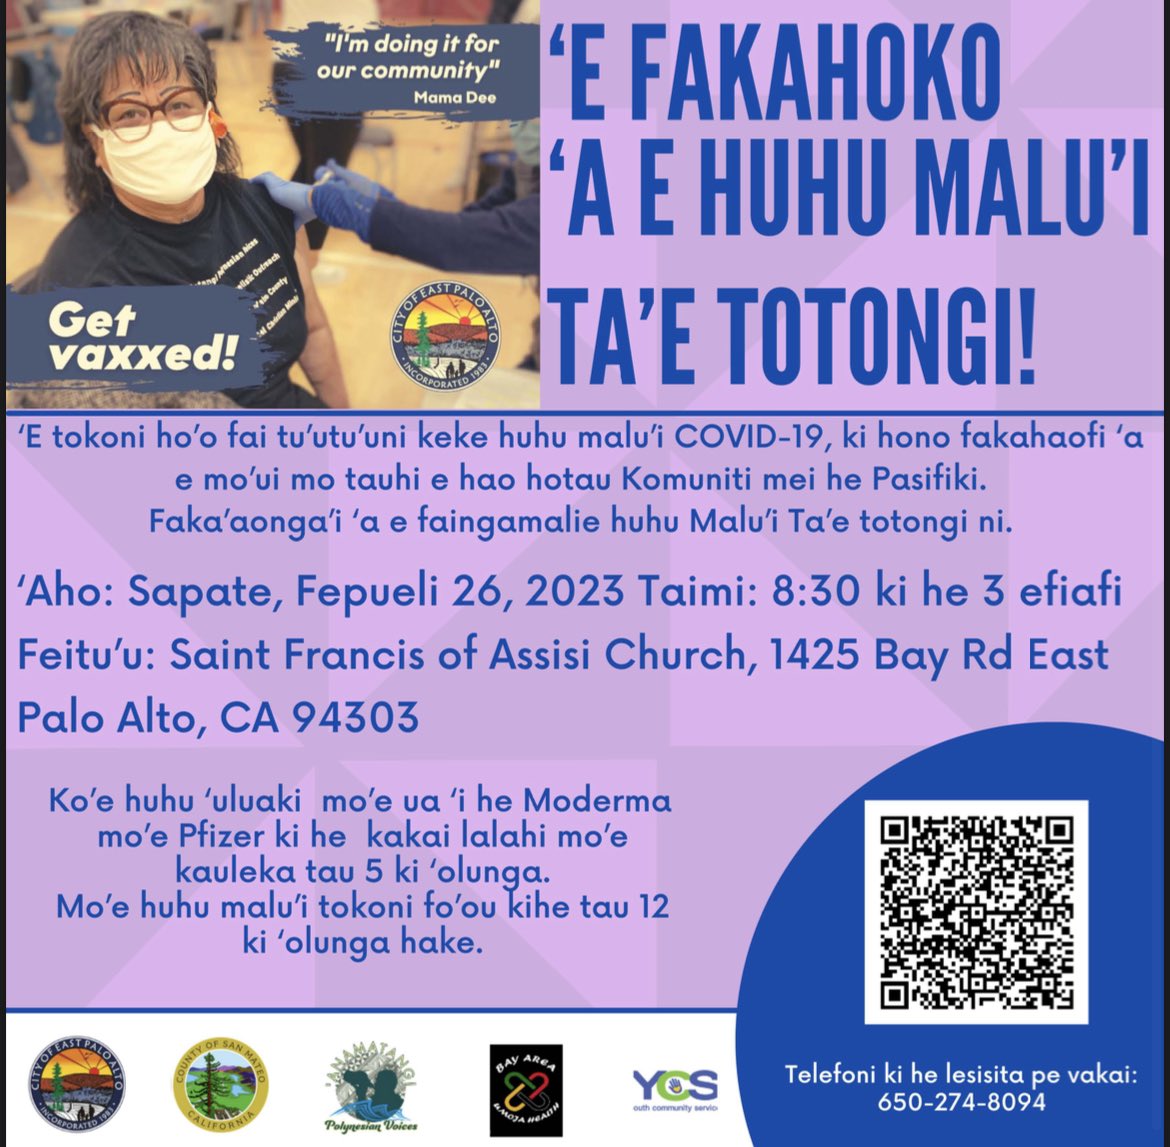 PASIFIKA POP - UP!

Free Vaccine Clinic at Saint Francis of Assisi Church

1425 Bay Rd, East Palo Alto

SUNDAY FEBRUARY  26, 2023 
8:30 AM - 3:00 PM

#GetVaxxed #Covid19 #BivalentBooster